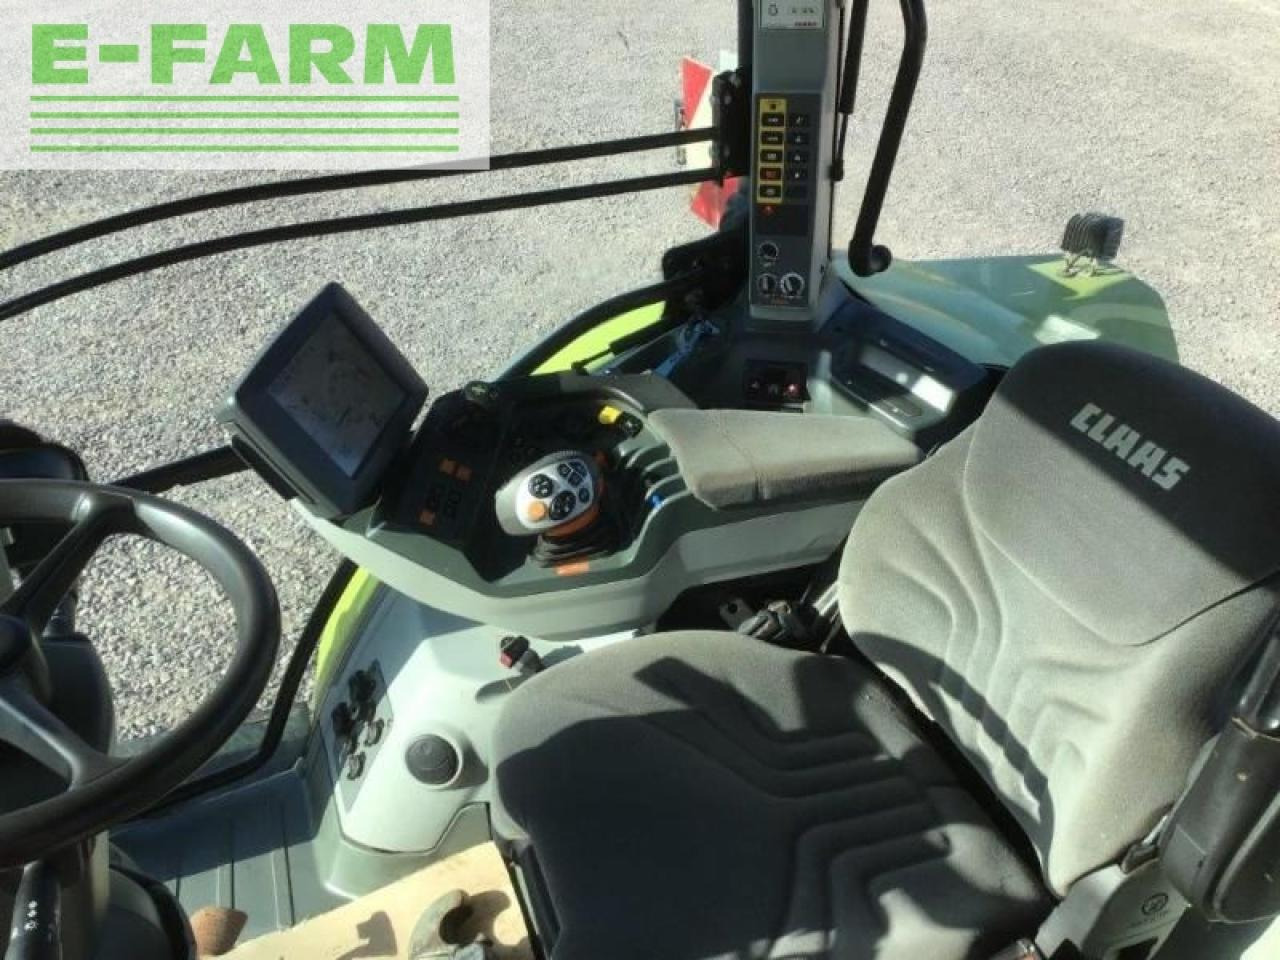 Tracteur agricole CLAAS arion 650 cmatic CIS